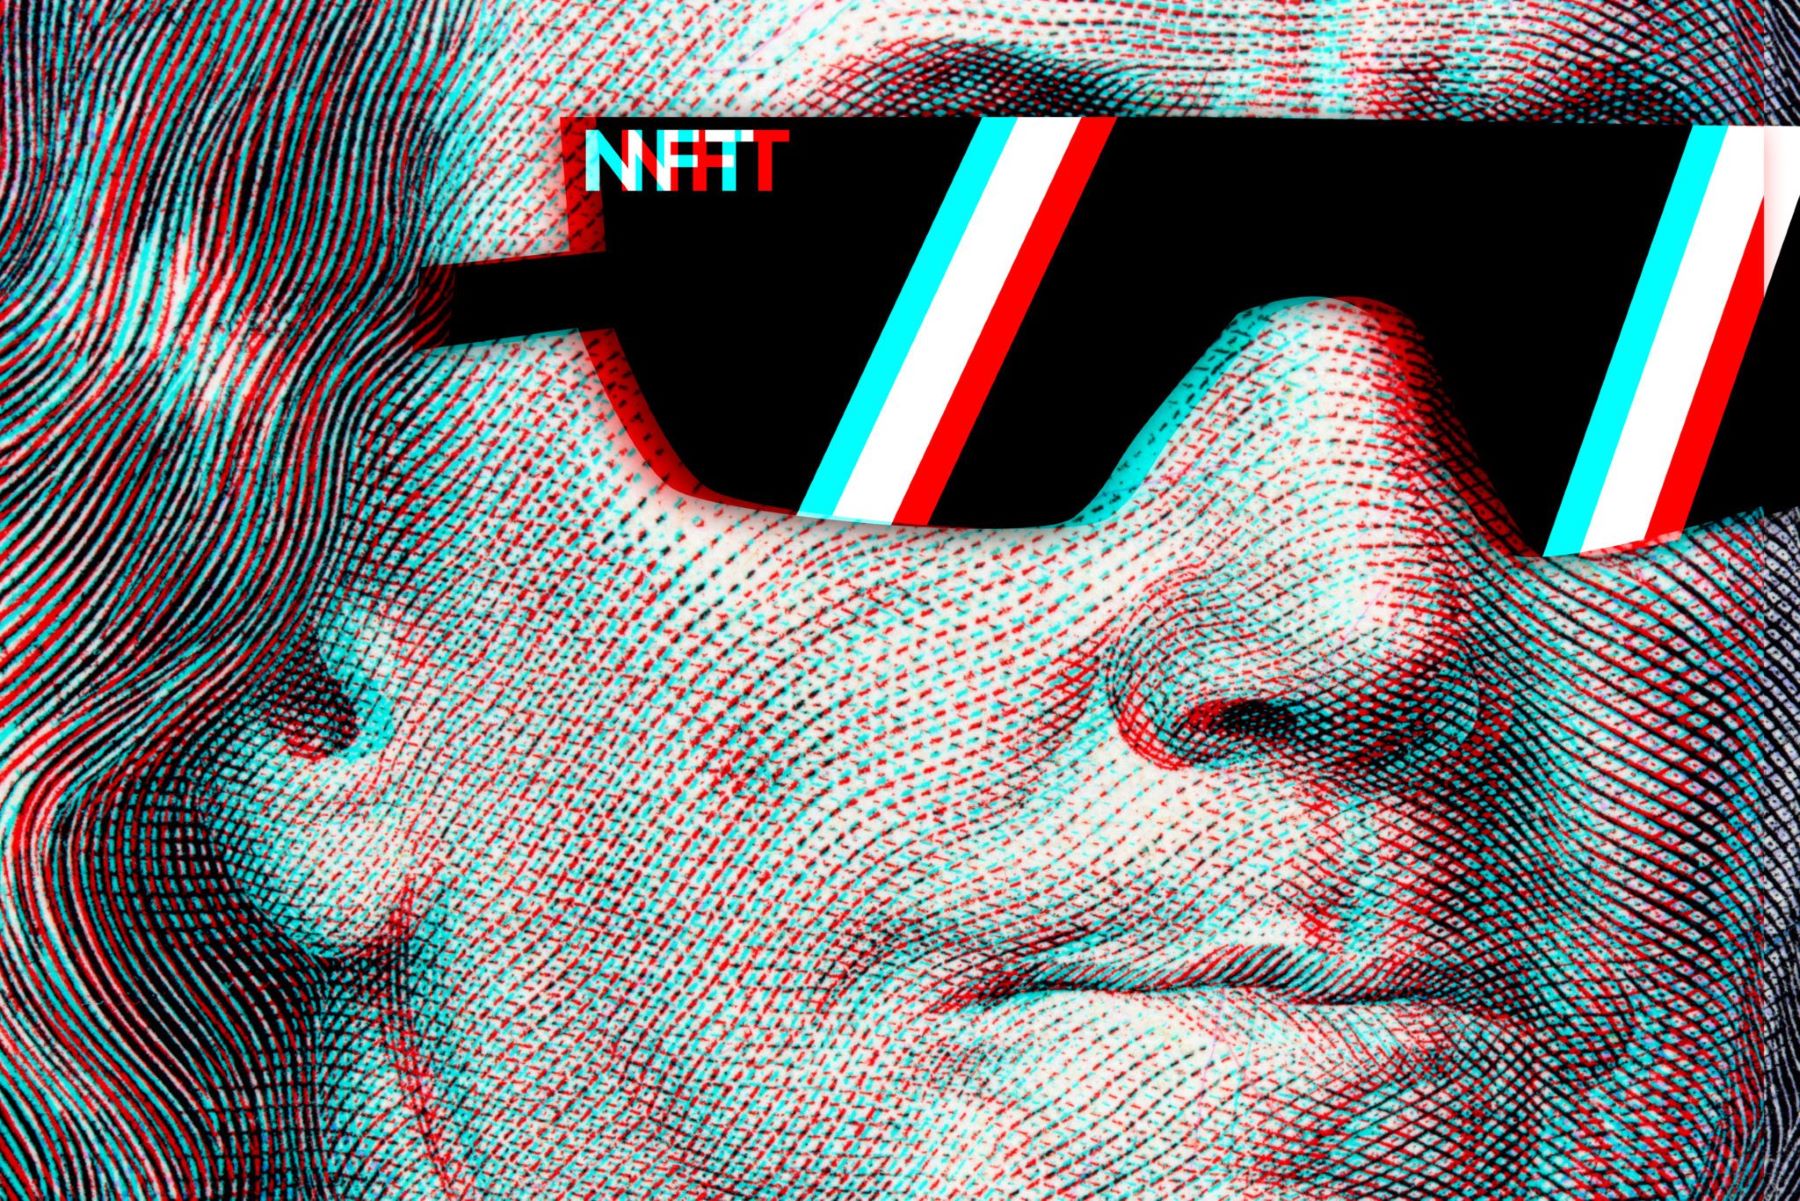 Concept Cryptographic Nft On A Hundred Dollar Bill Franklin In Glasses Stockpack Gettyimages Scaled